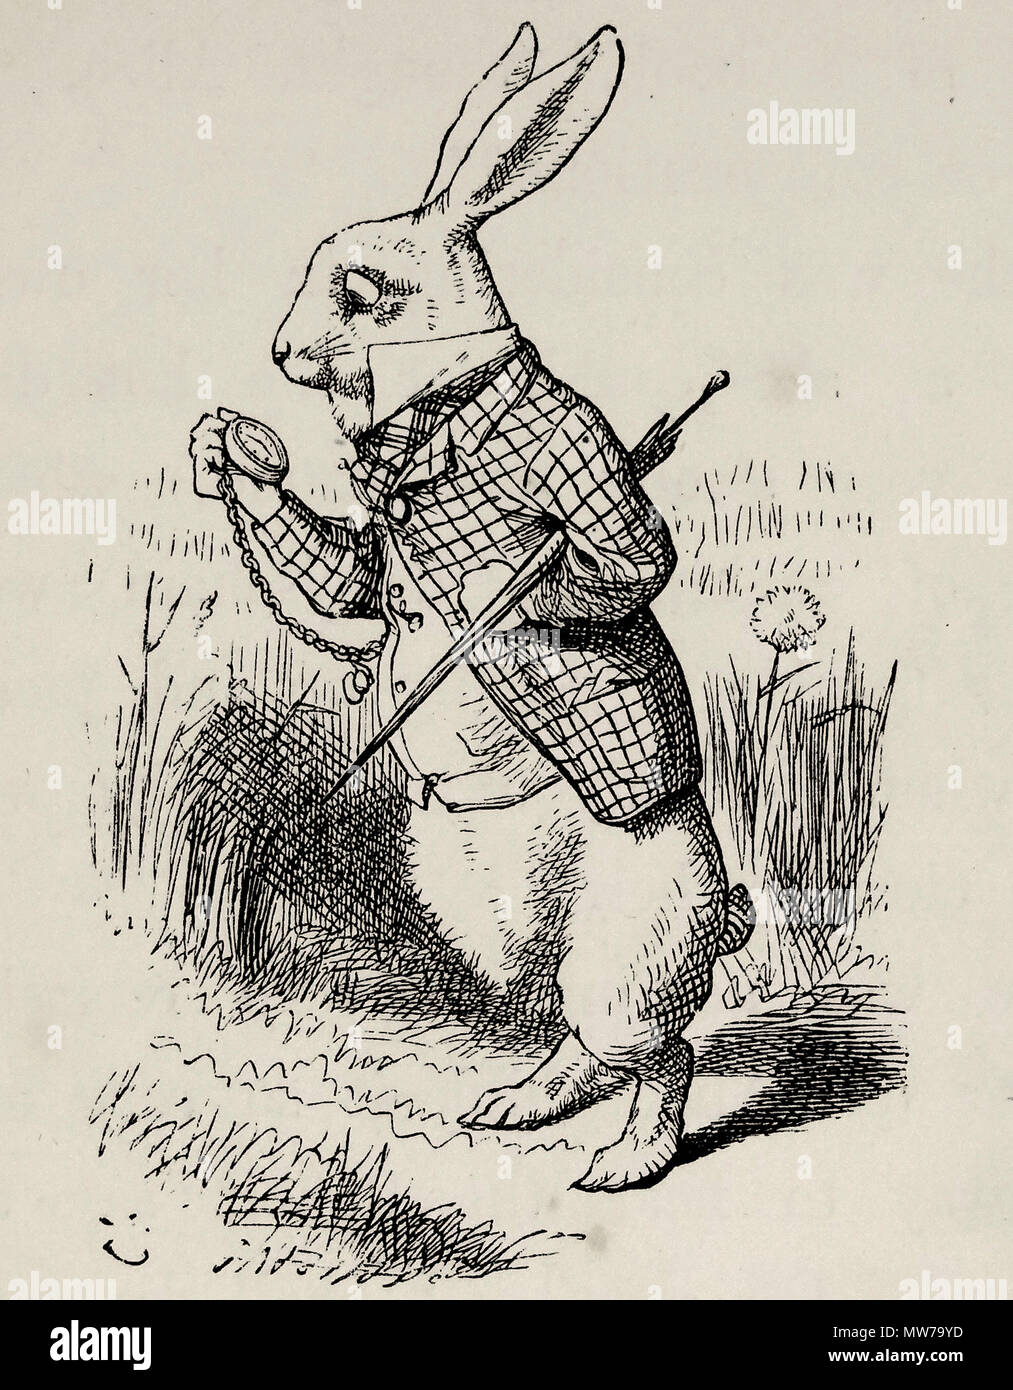 John Tenniel for 'Alice's Adventures in Wonderland' by Lewis Carroll (1866). First American Edition Stock Photo